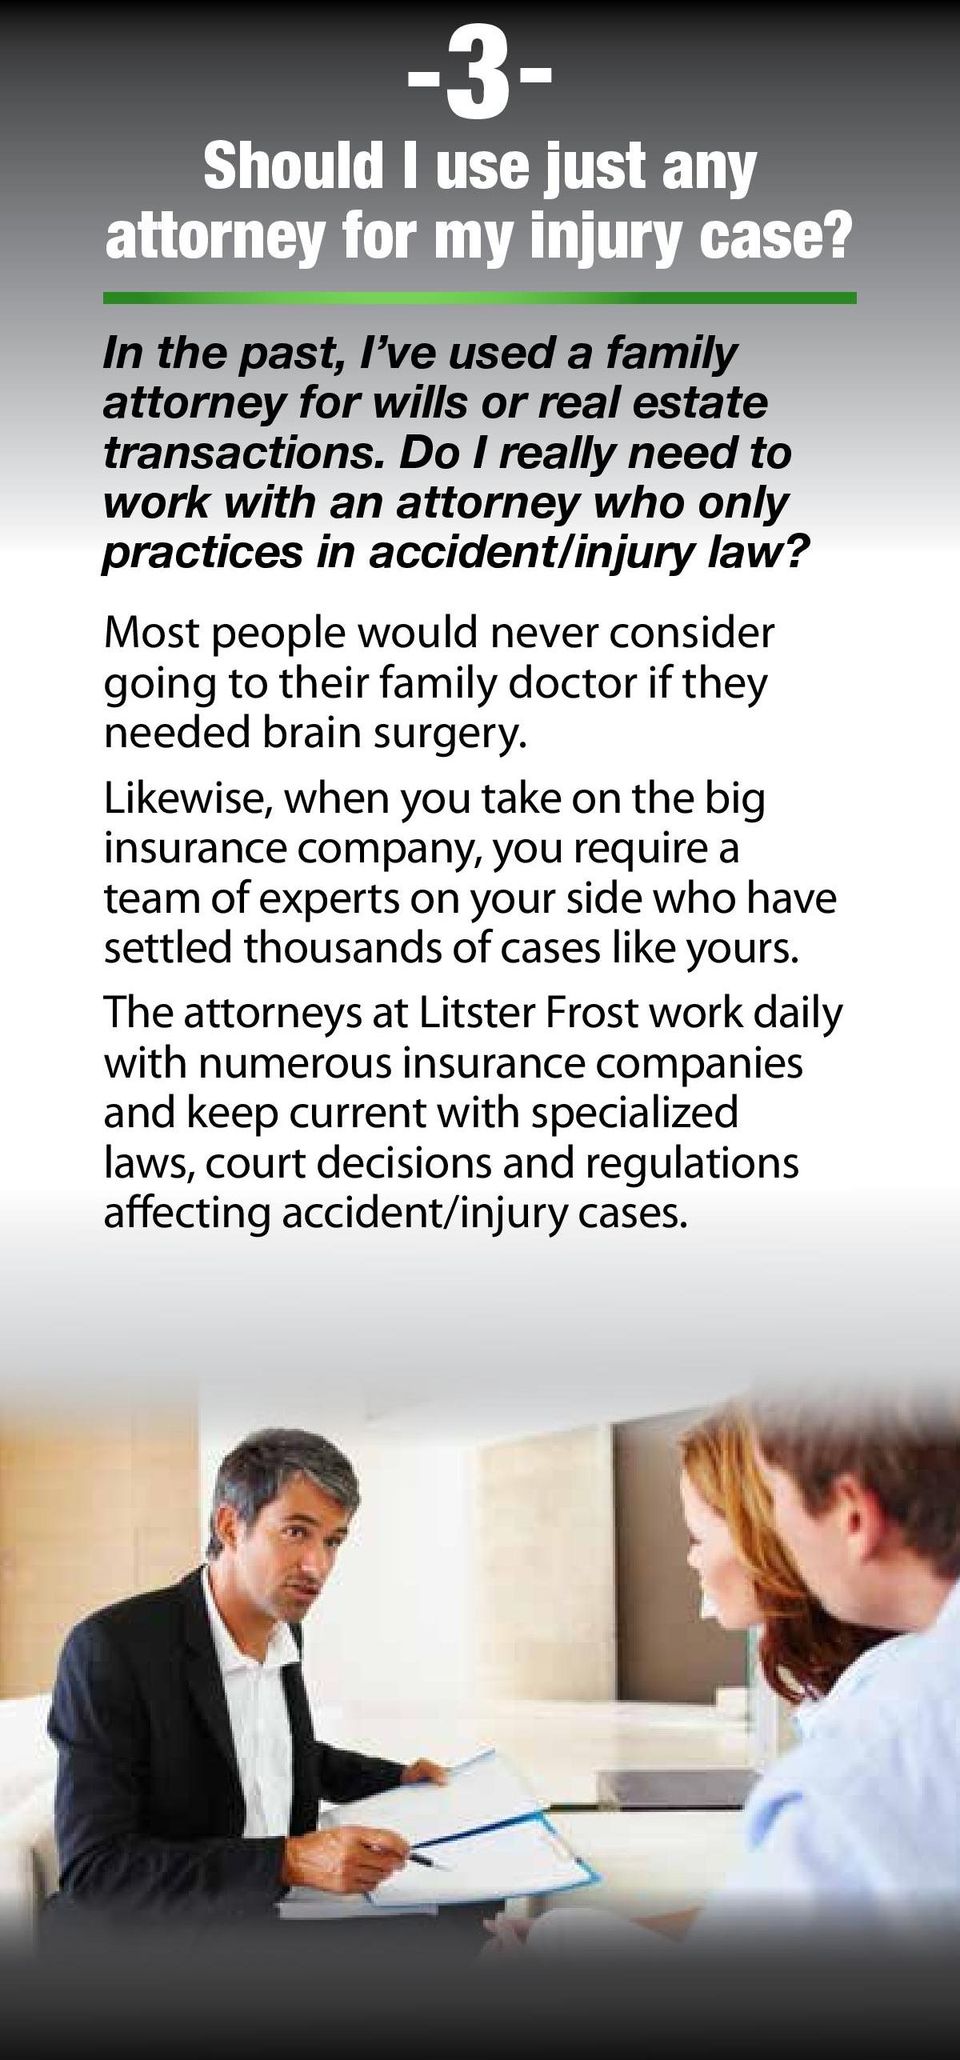 Most people would never consider going to their family doctor if they needed brain surgery.